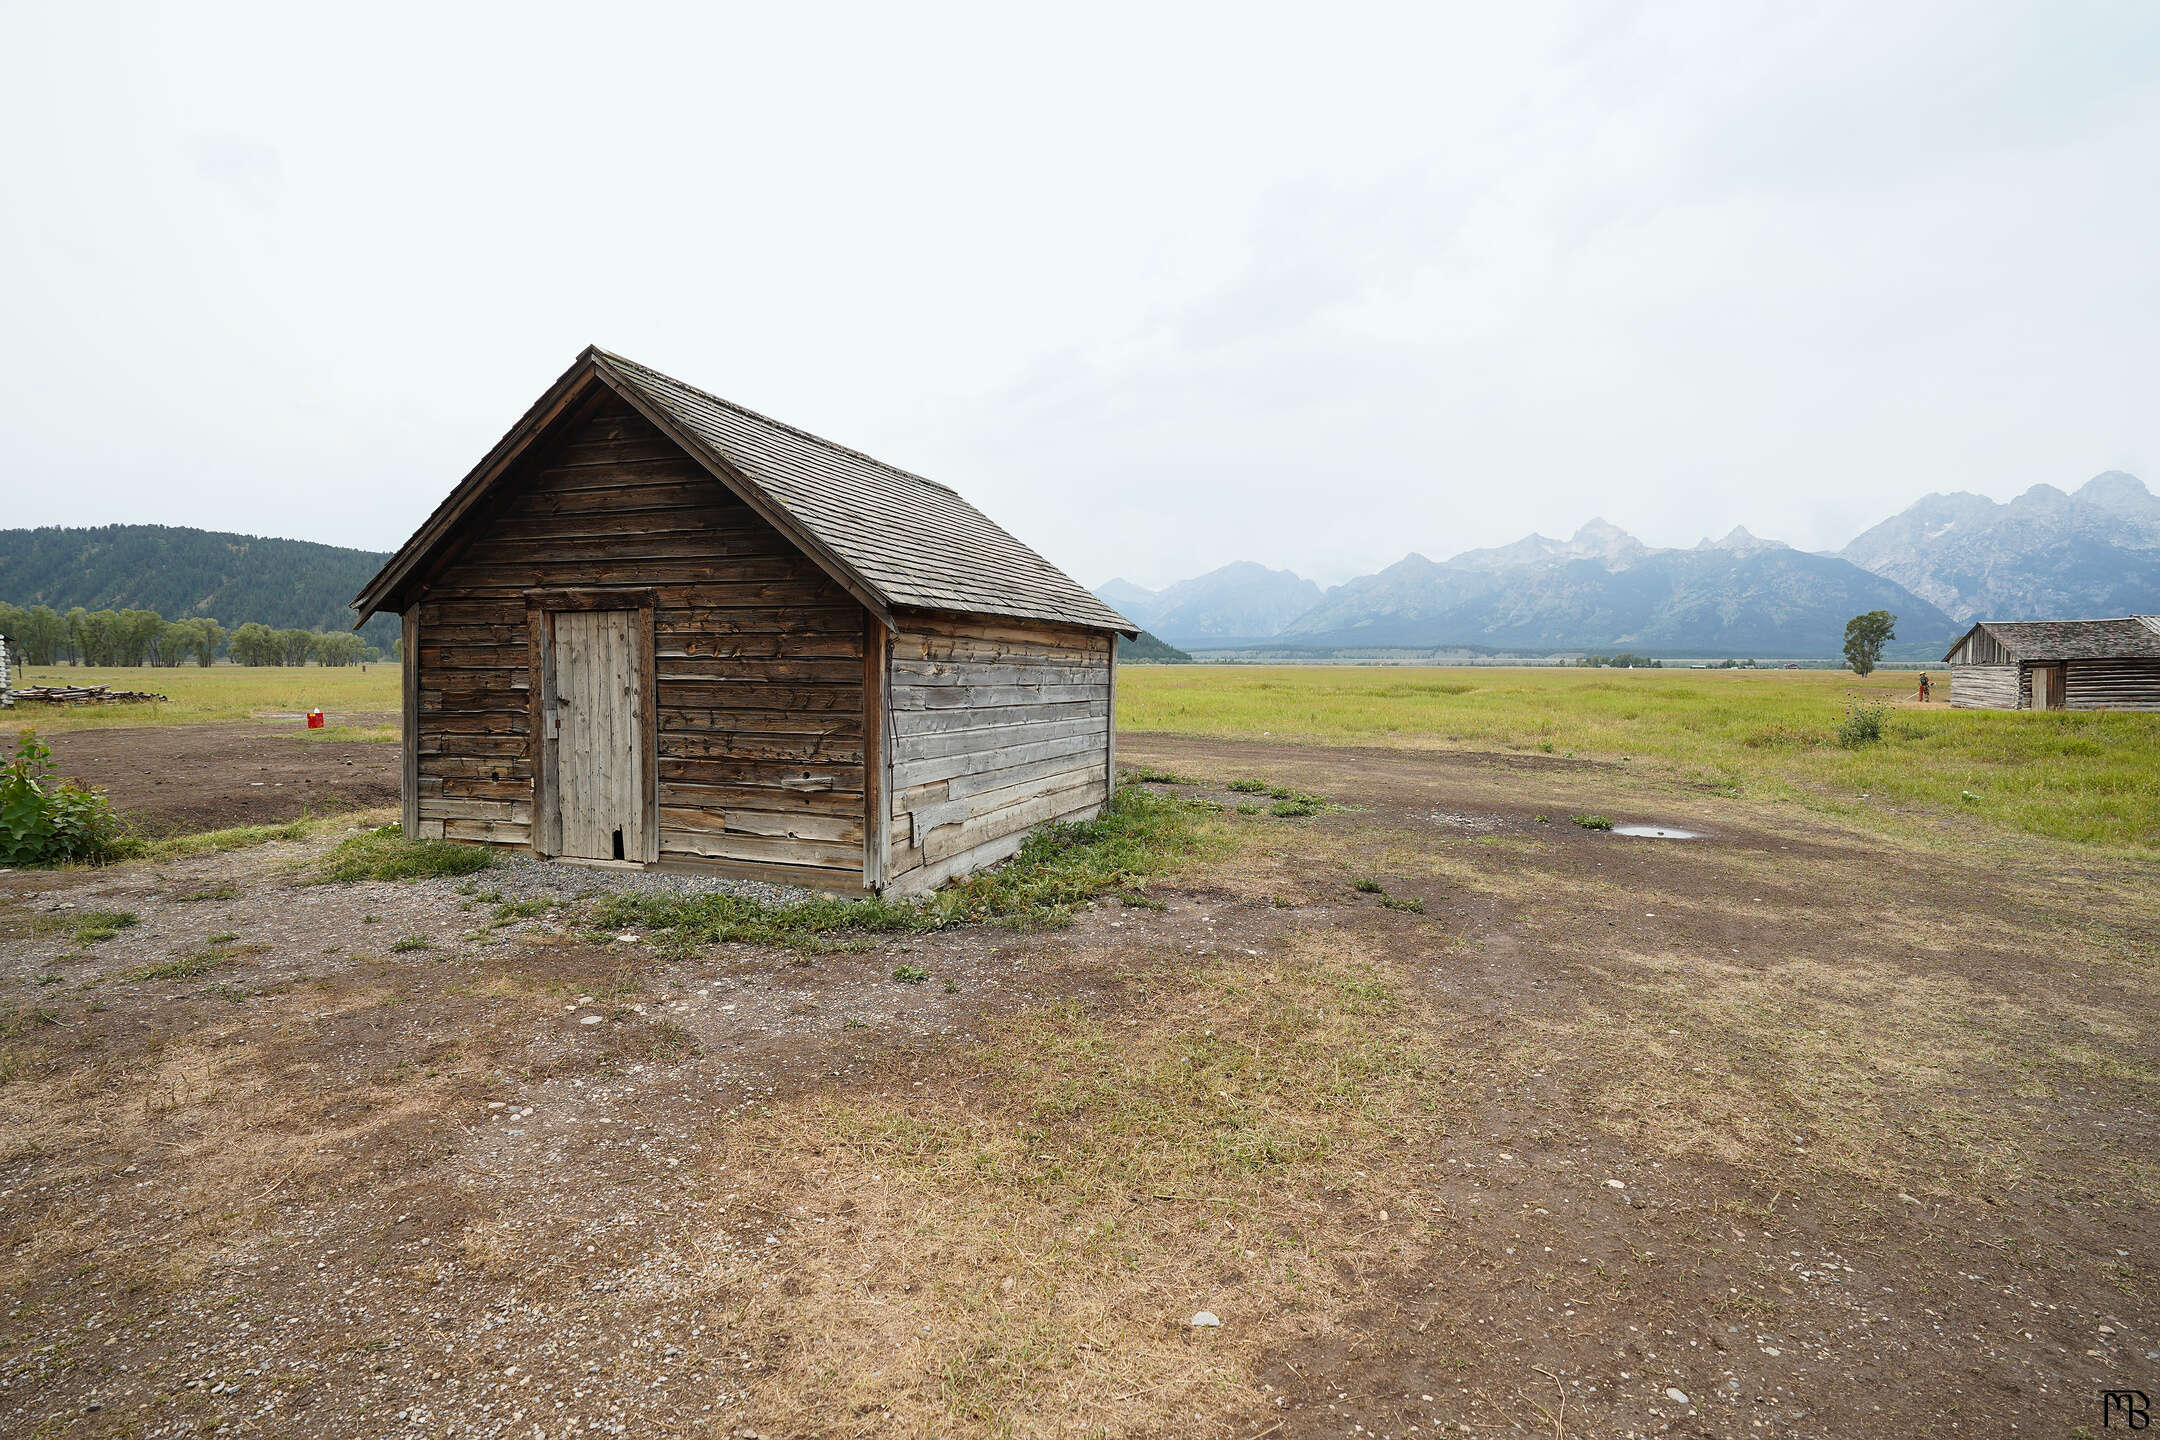 An old shed in front of the mountains